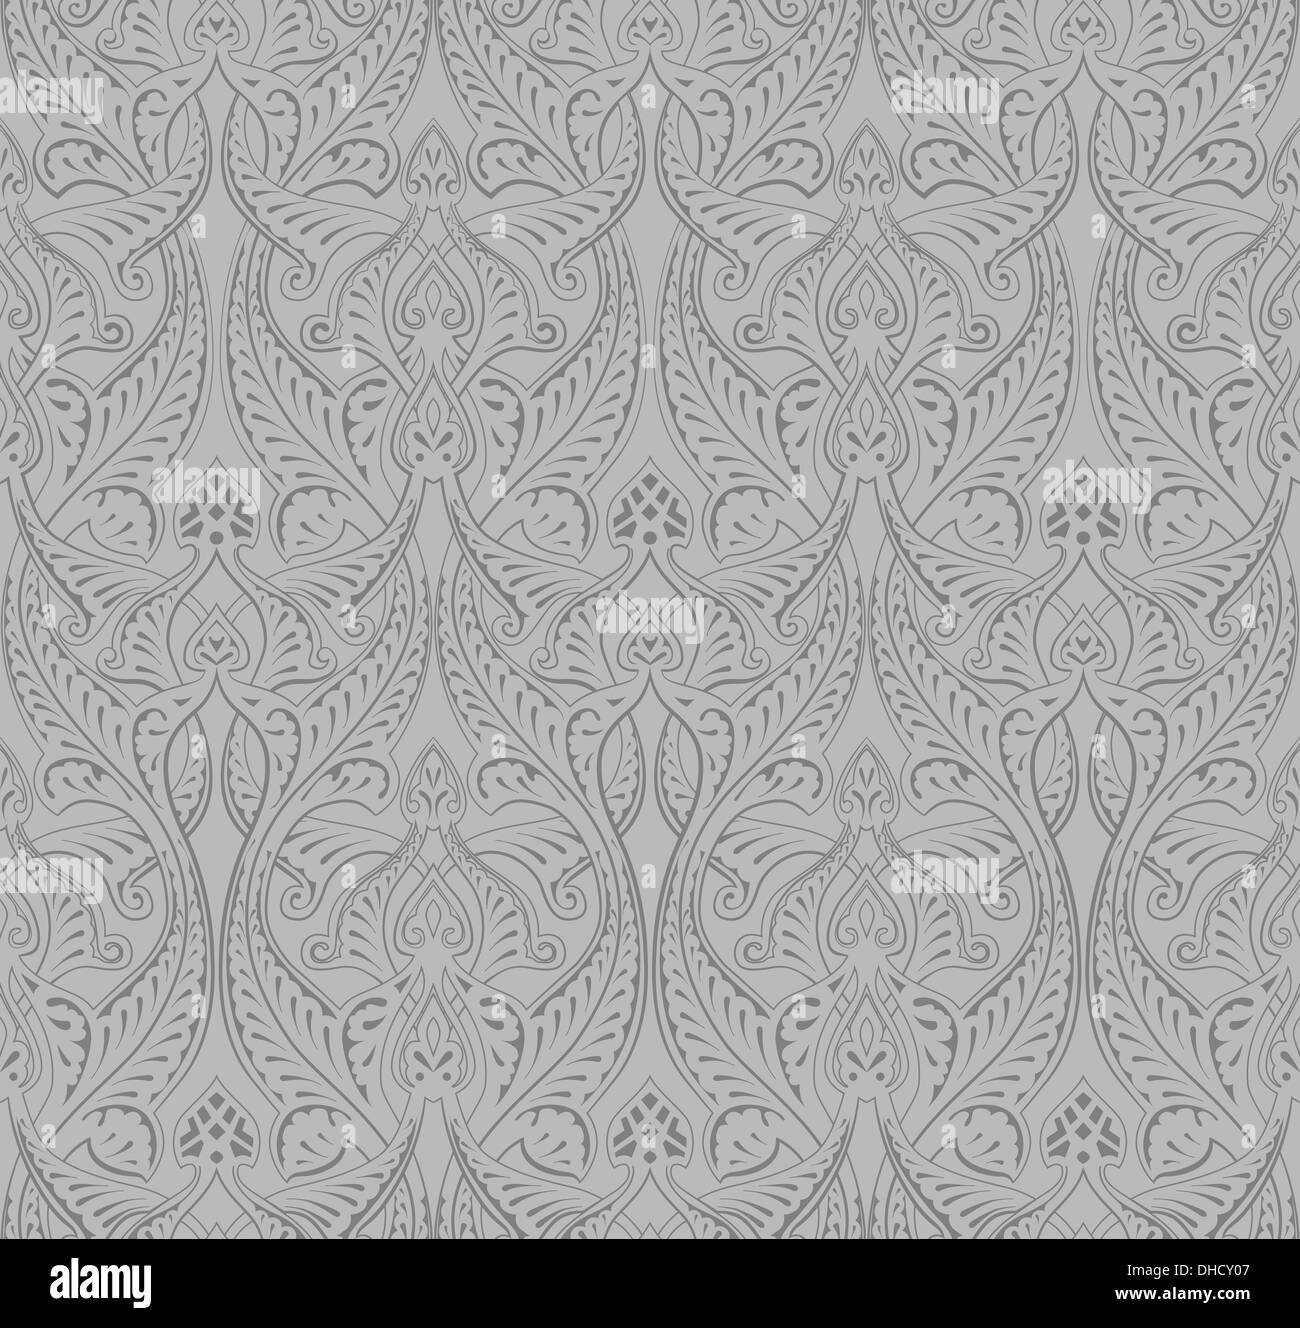 Vintage intricate seamless background tile based on Middle Eastern Arabic motif pattern Stock Photo